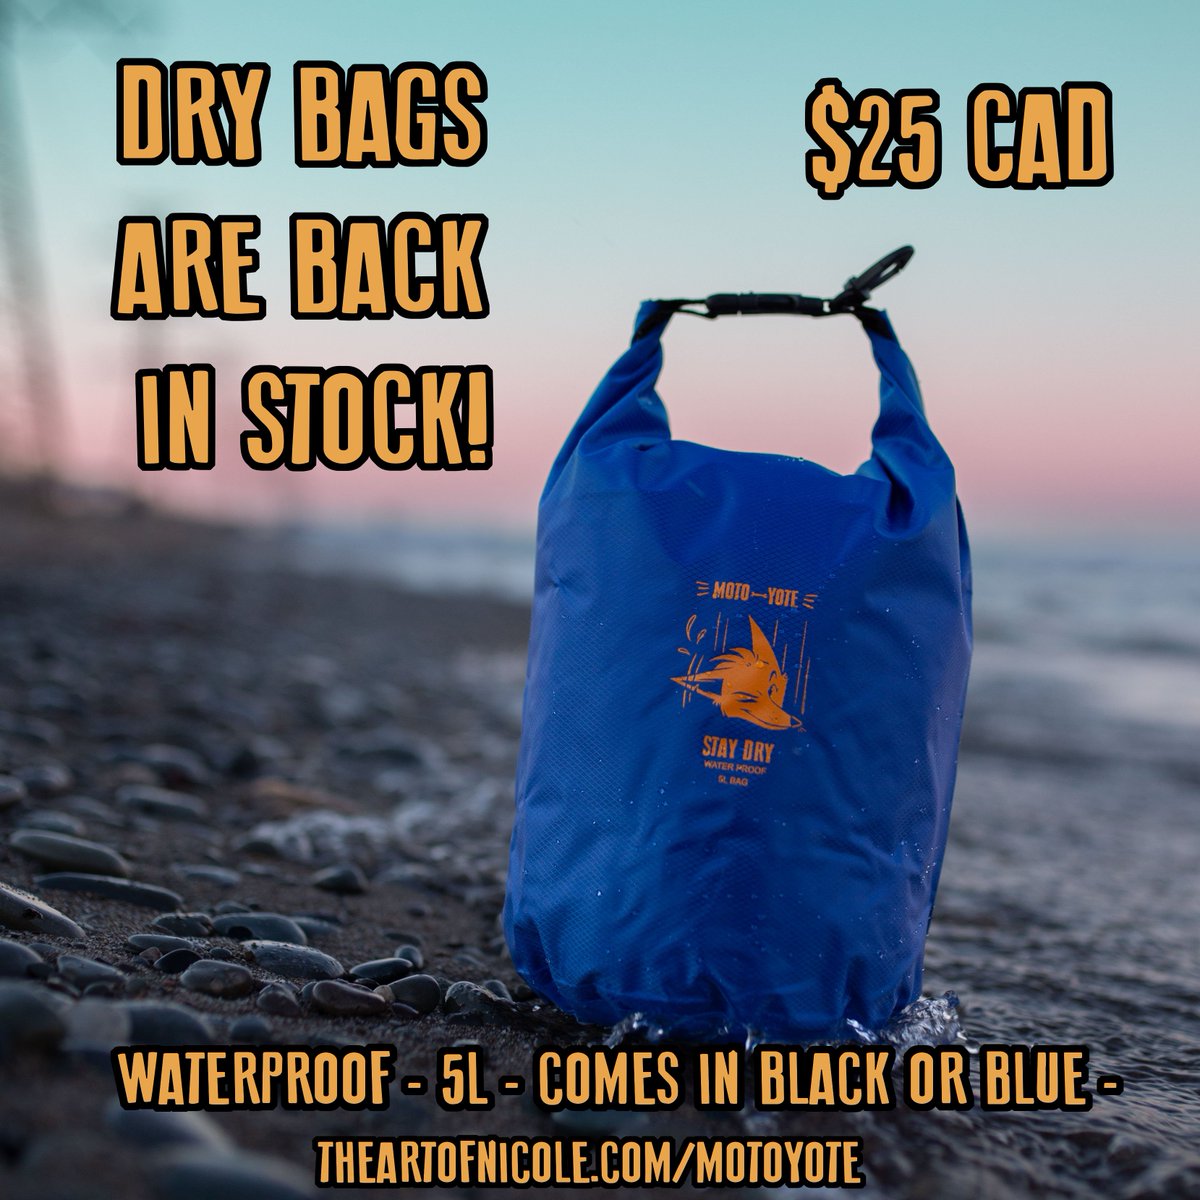 DRY BAGS ARE BACK IN STOCK 💦 Dry bags are waterproof and can hold up to 5L! Perfect for stowing away electronics, documents, etc to keep them away from the wet elements when you're out adventuring! Black, (and introducing) blue are available for colour options!